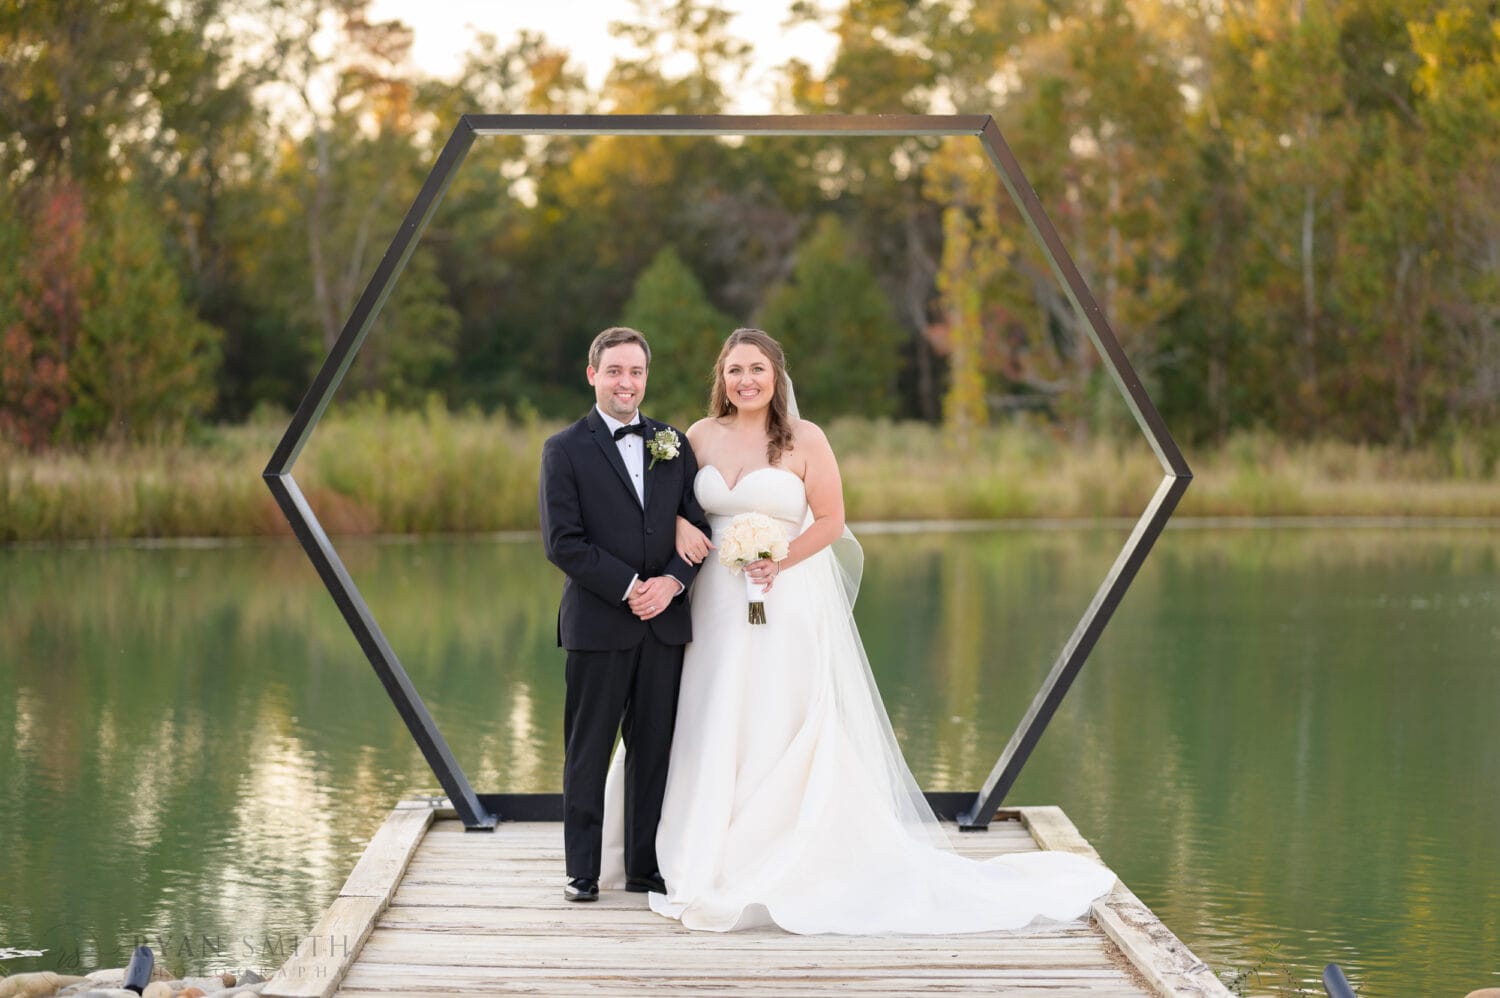 Portrait of bride and groom in front of the hexagon by the lake - The Venue at White Oaks Farm